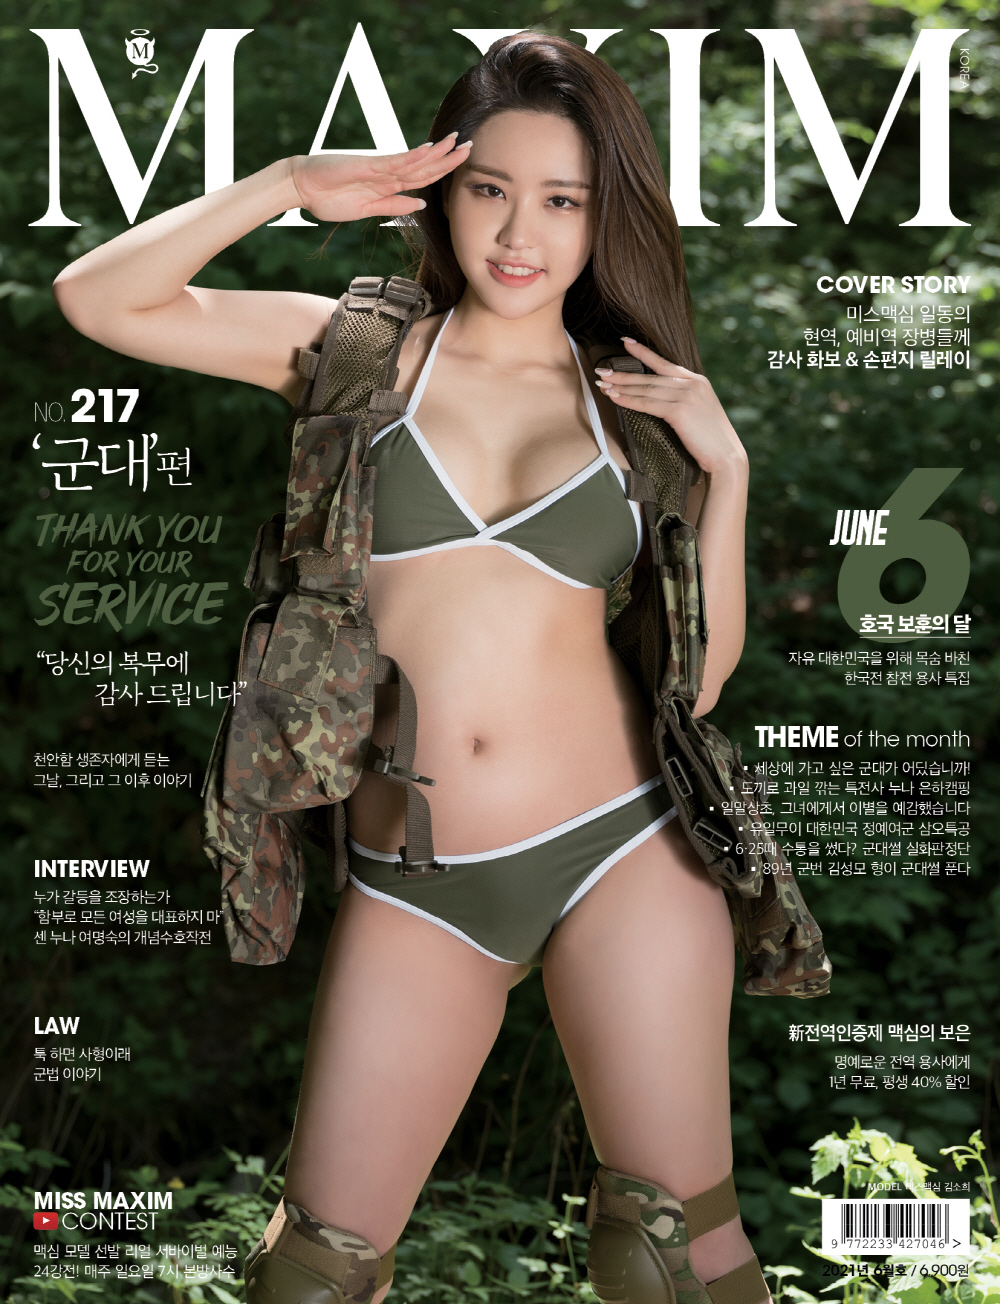 The cover of the June issue of Maxim.